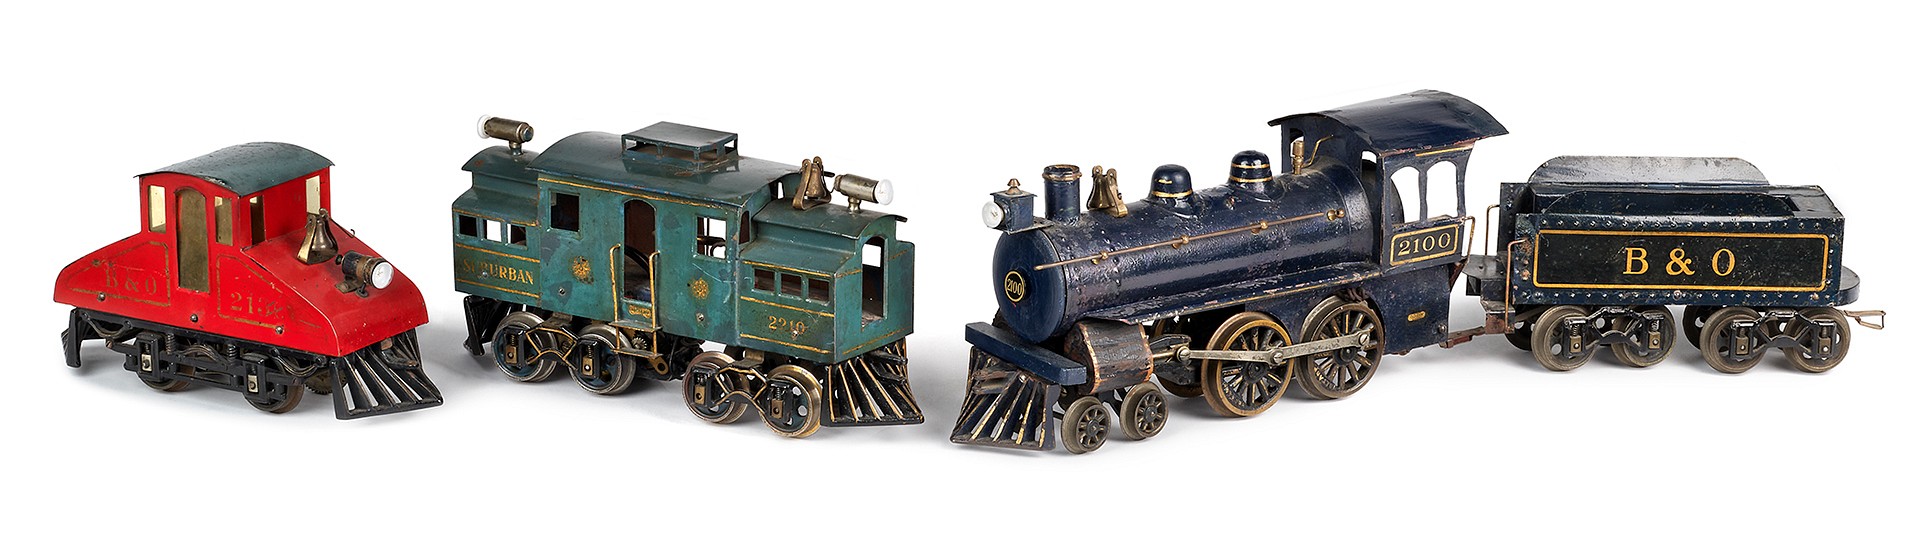 Antique Toy & Train Auction by Pook & Pook Inc